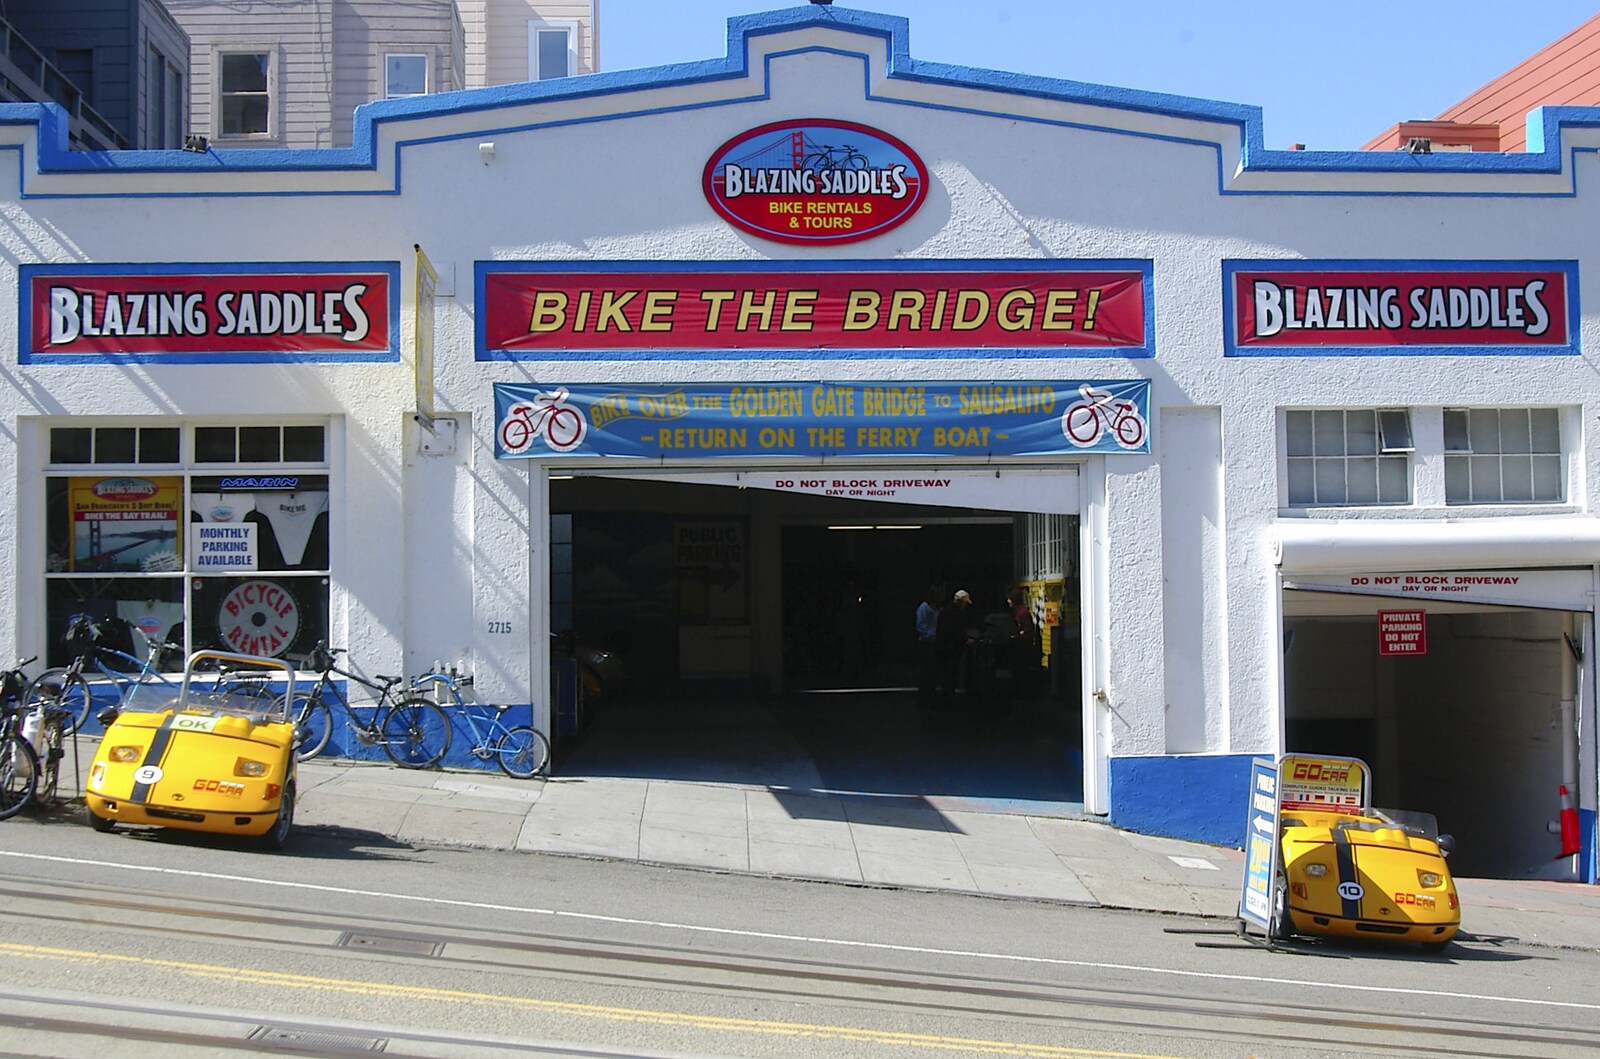 Blazing Saddles bike shop from Chinatown, Telegraph Hill and Fisherman's Wharf, San Francisco, California, US - 11th March 2006